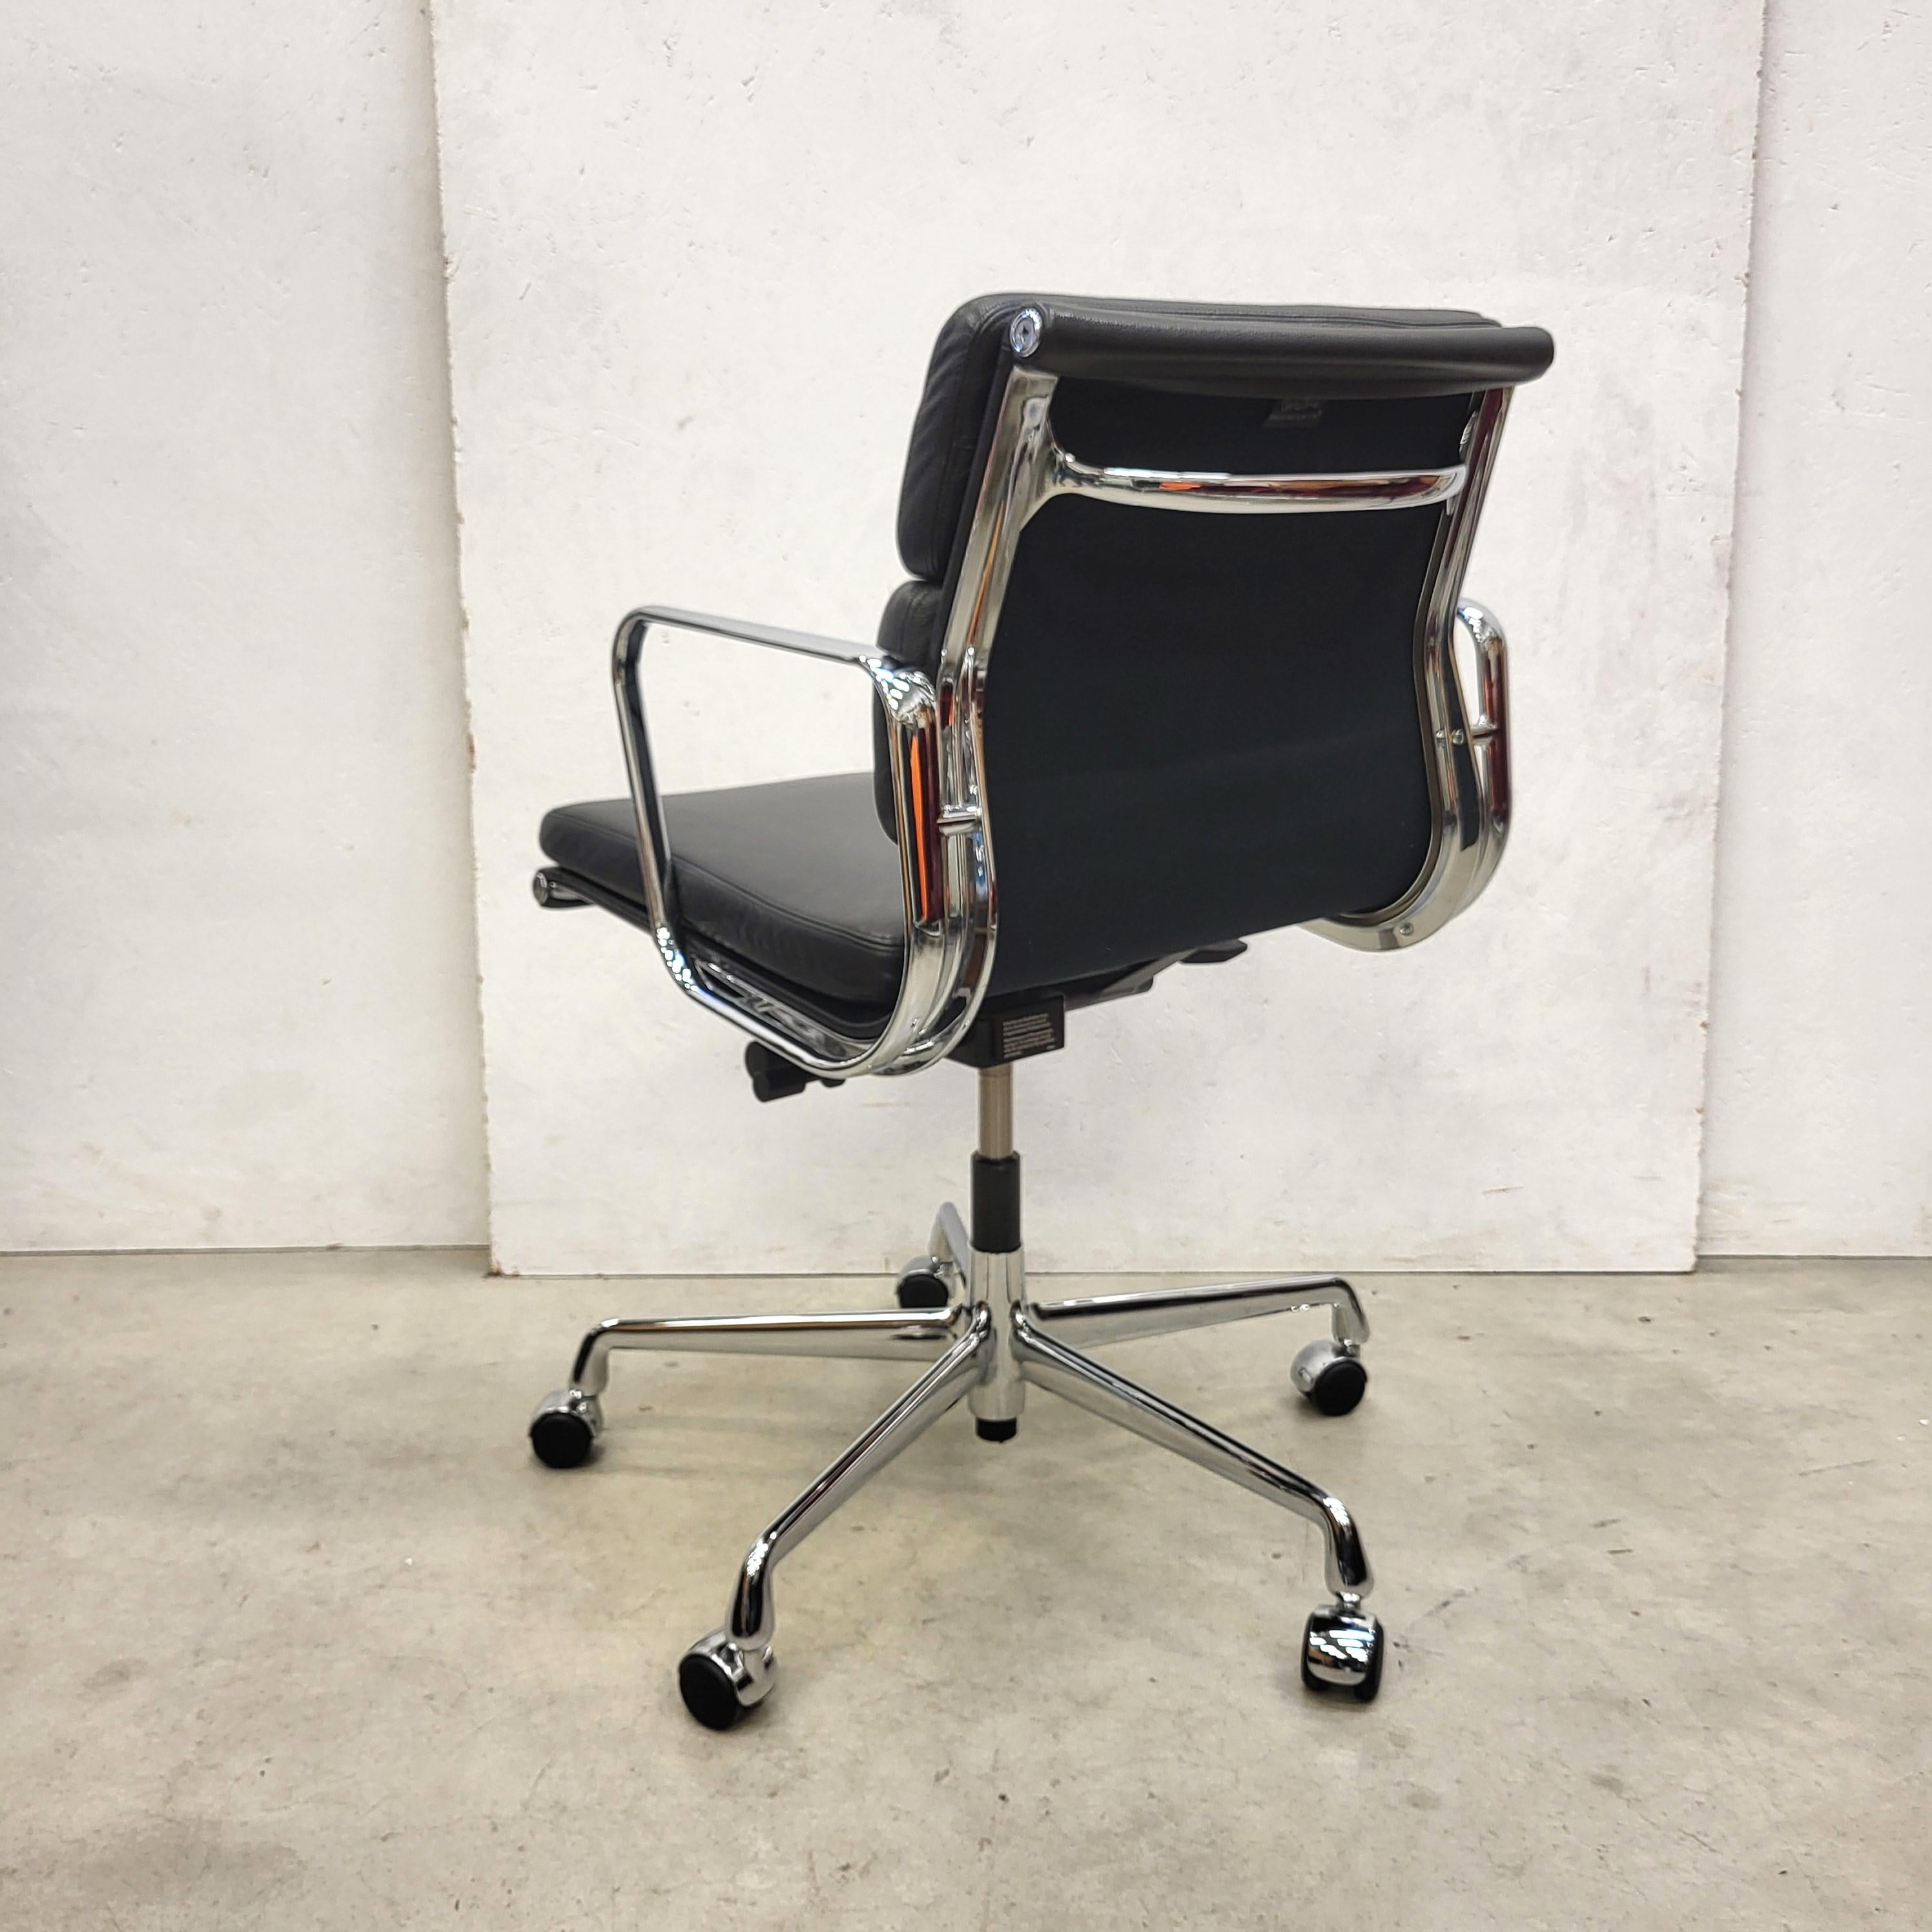 Contemporary Black Vitra EA217 Soft Pad Office Chair by Charles Eames, 2014 Model